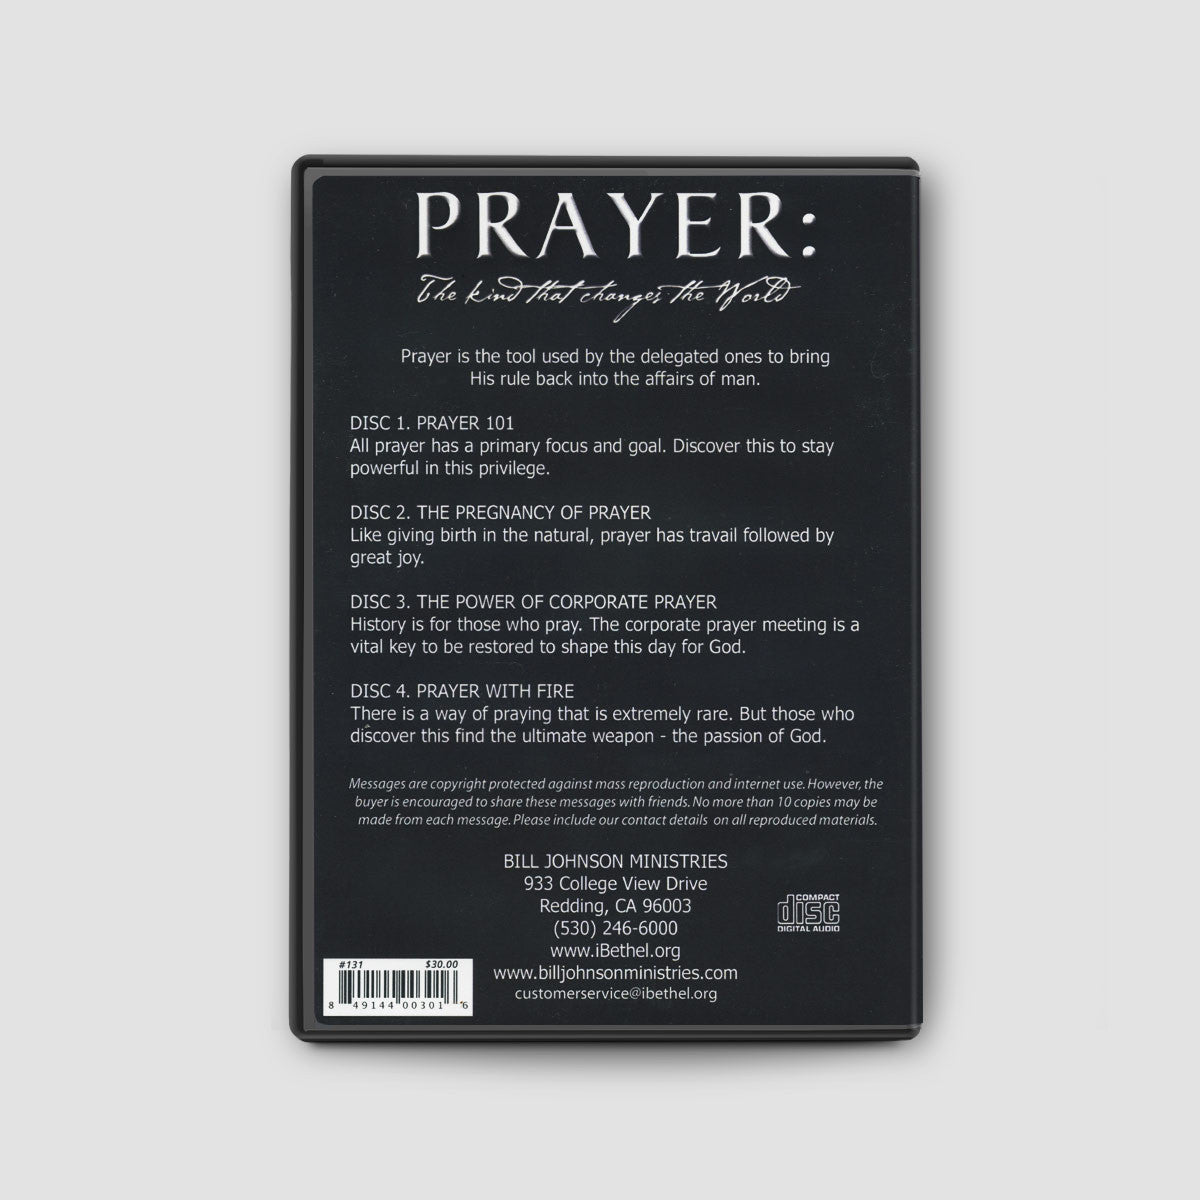 Prayer: The Kind that Changes the World